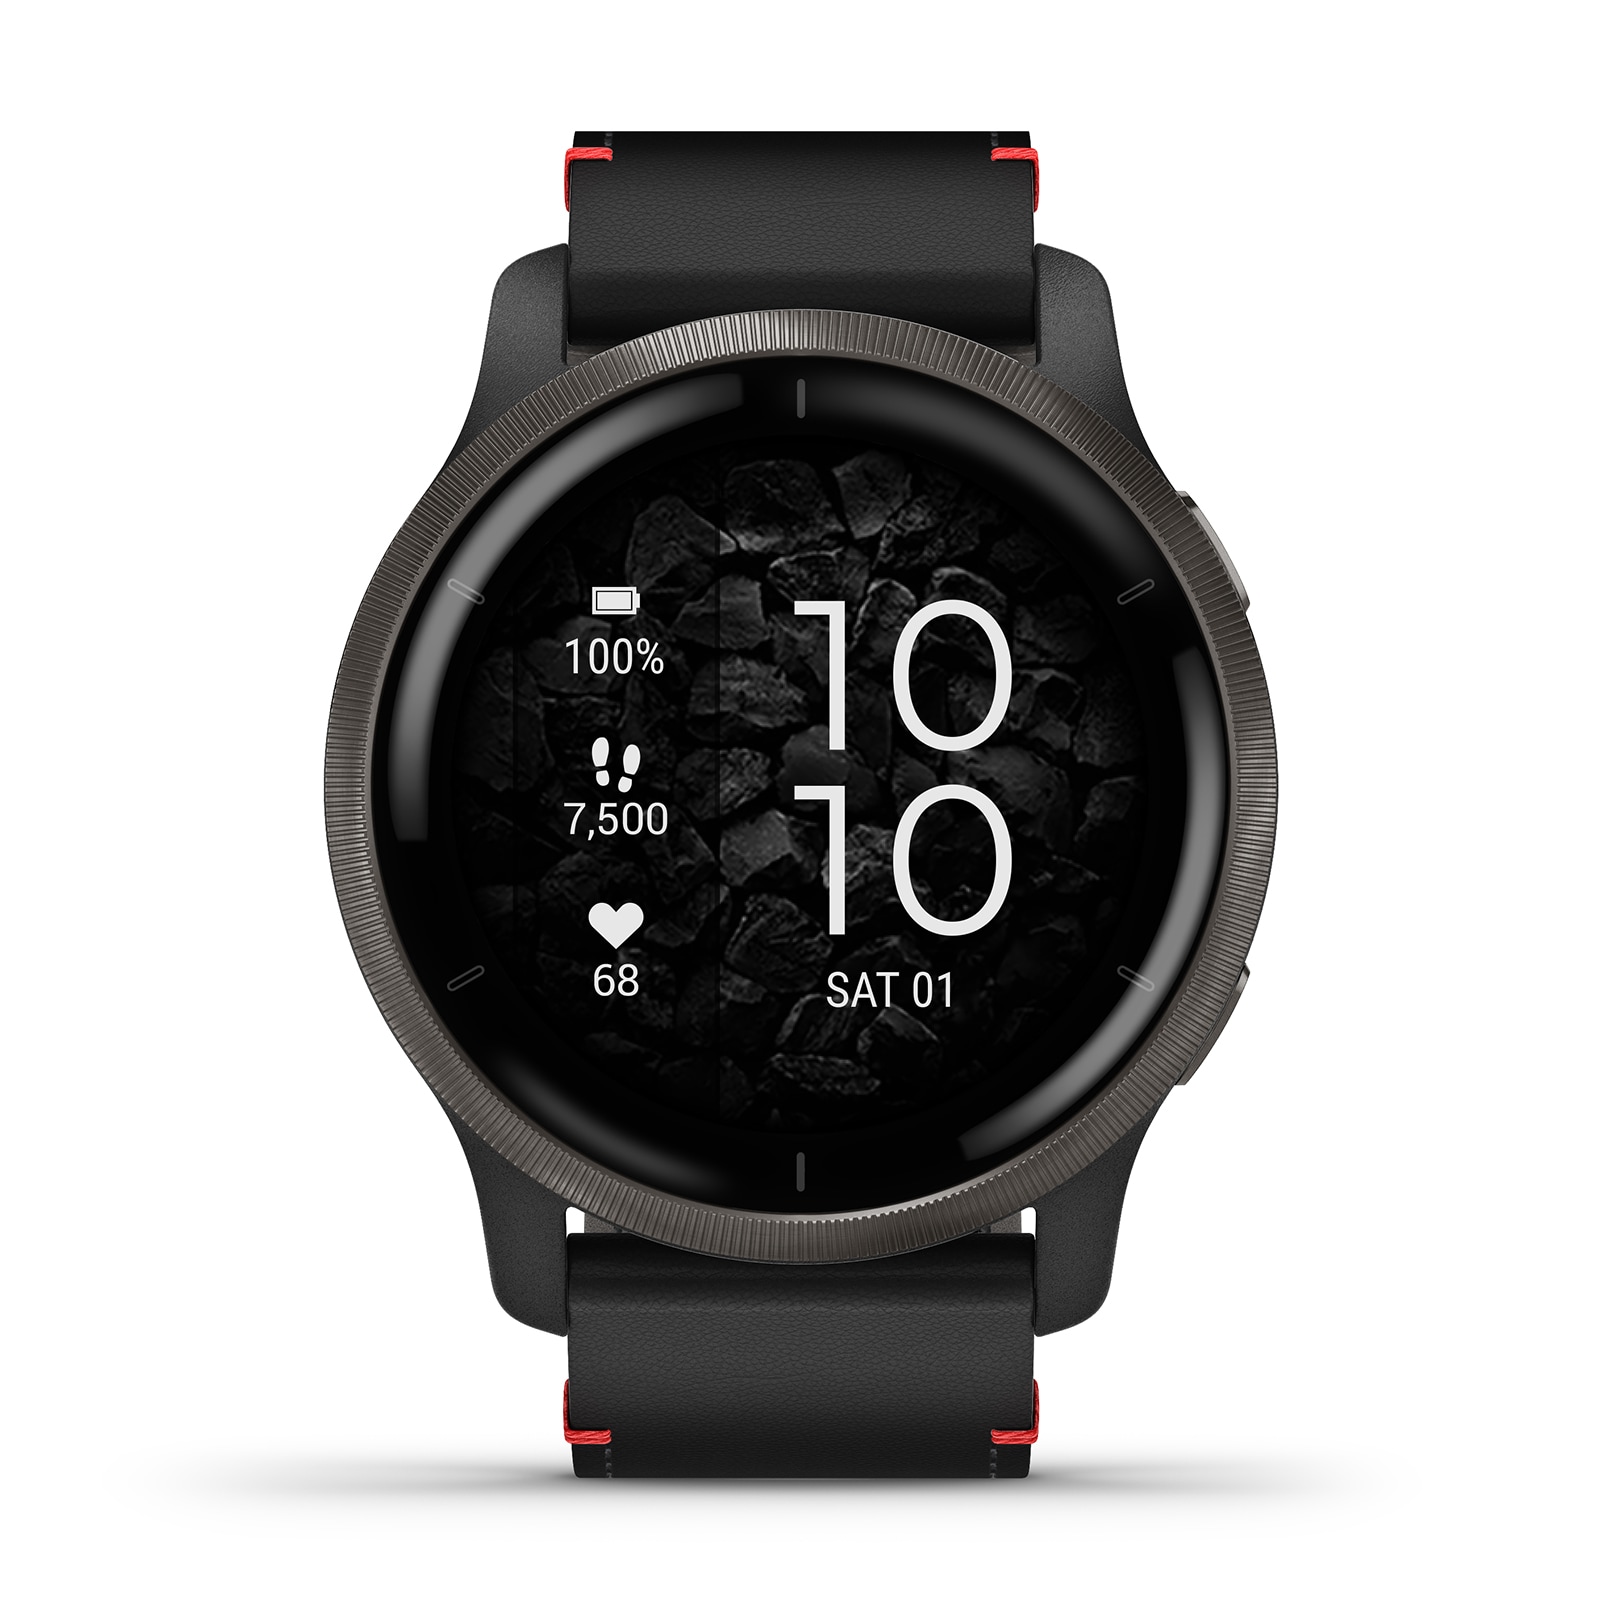 VenuÂ® 2 Slate Stainless Steel Bezel with Black Case and Leather Band